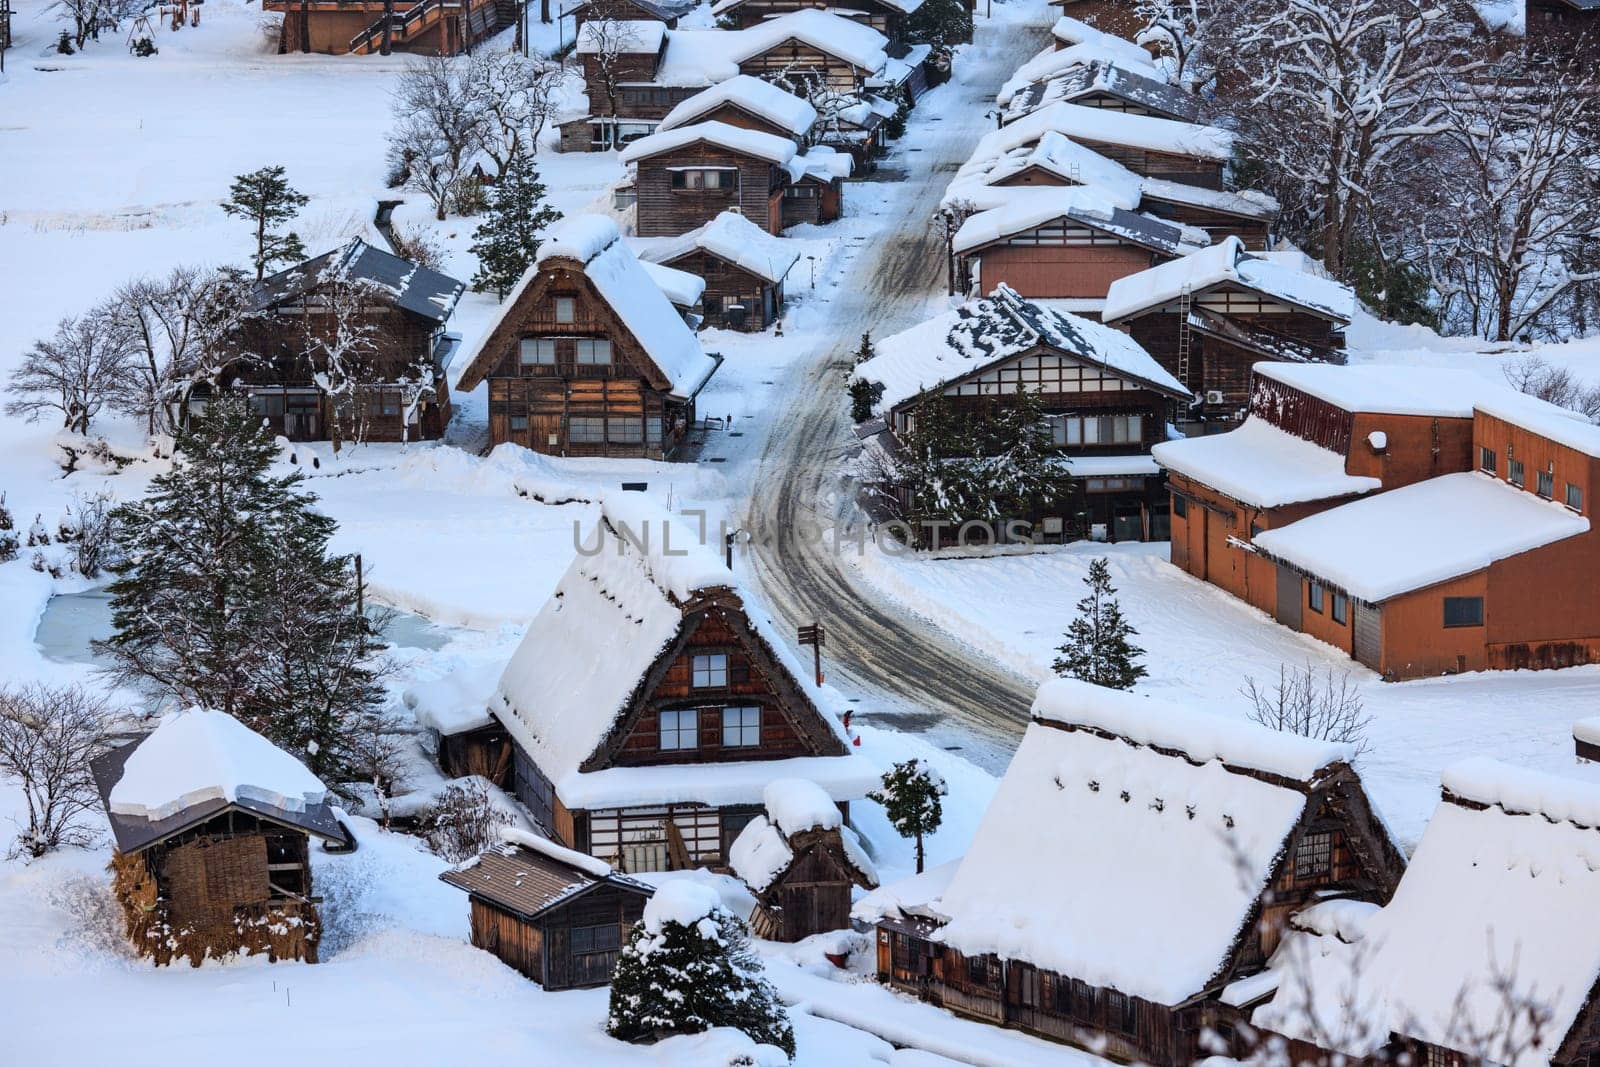 Snow covered A-frame roofs in historic Japanese mountain town in winter by Osaze